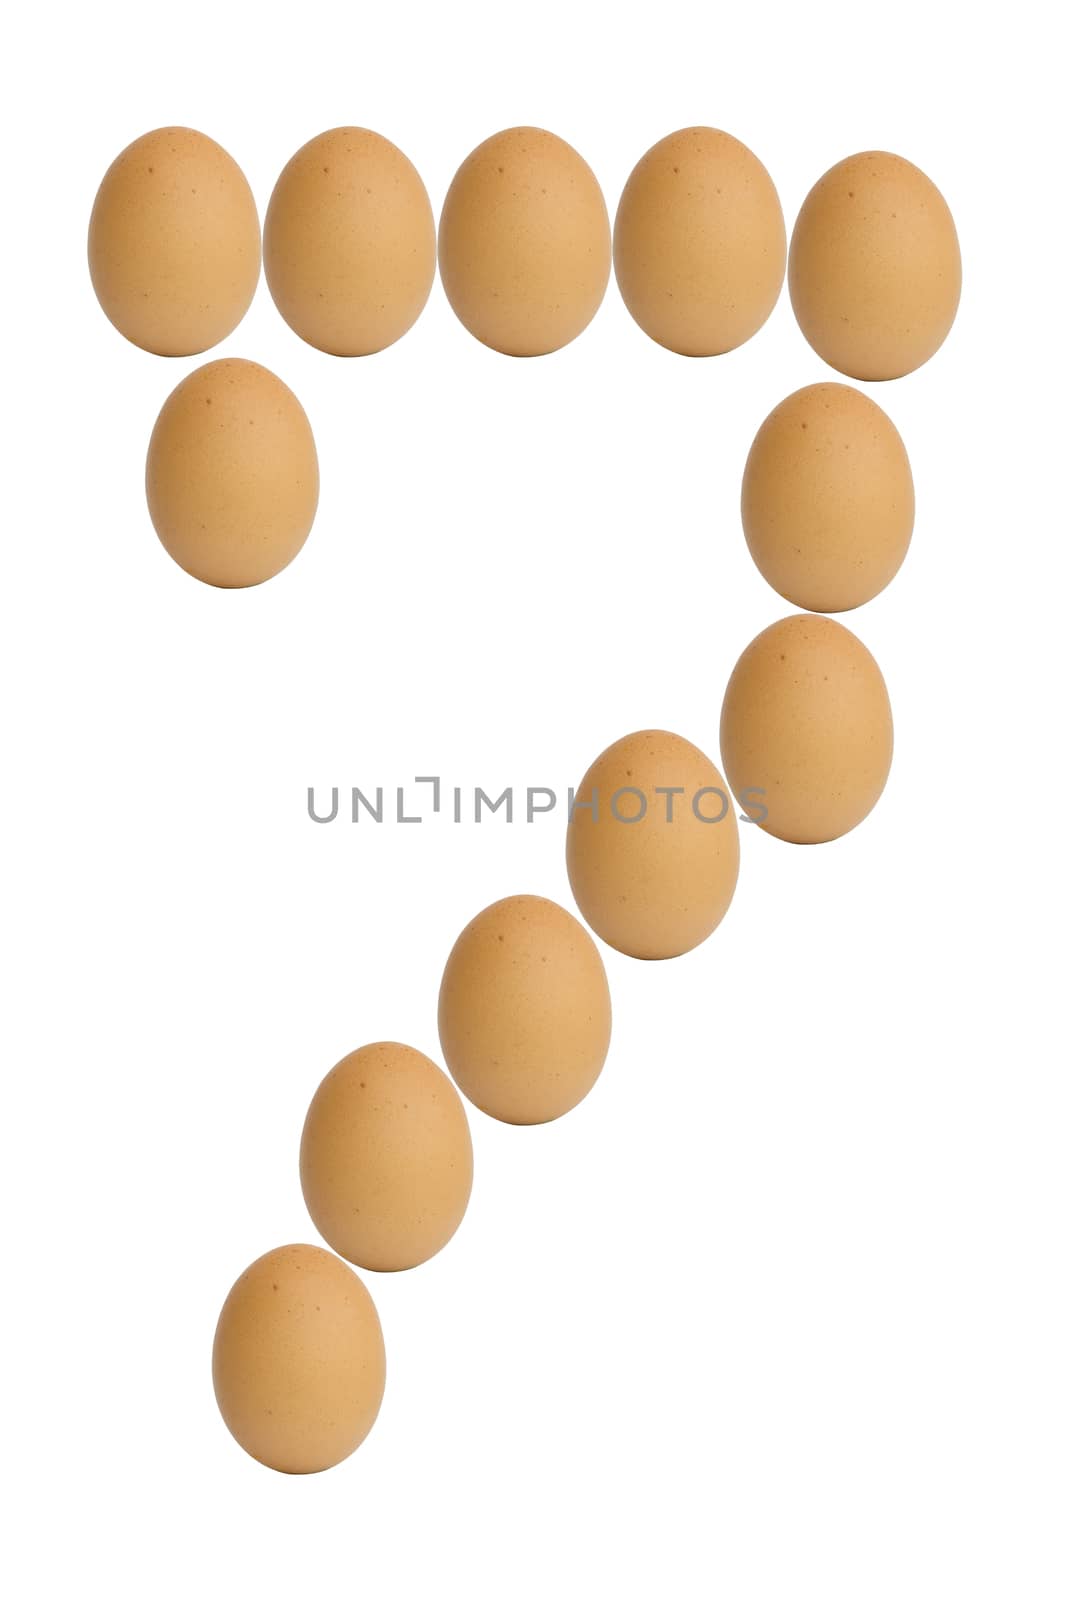 Number 0 to 9 from brown eggs alphabet isolated on white background, seven